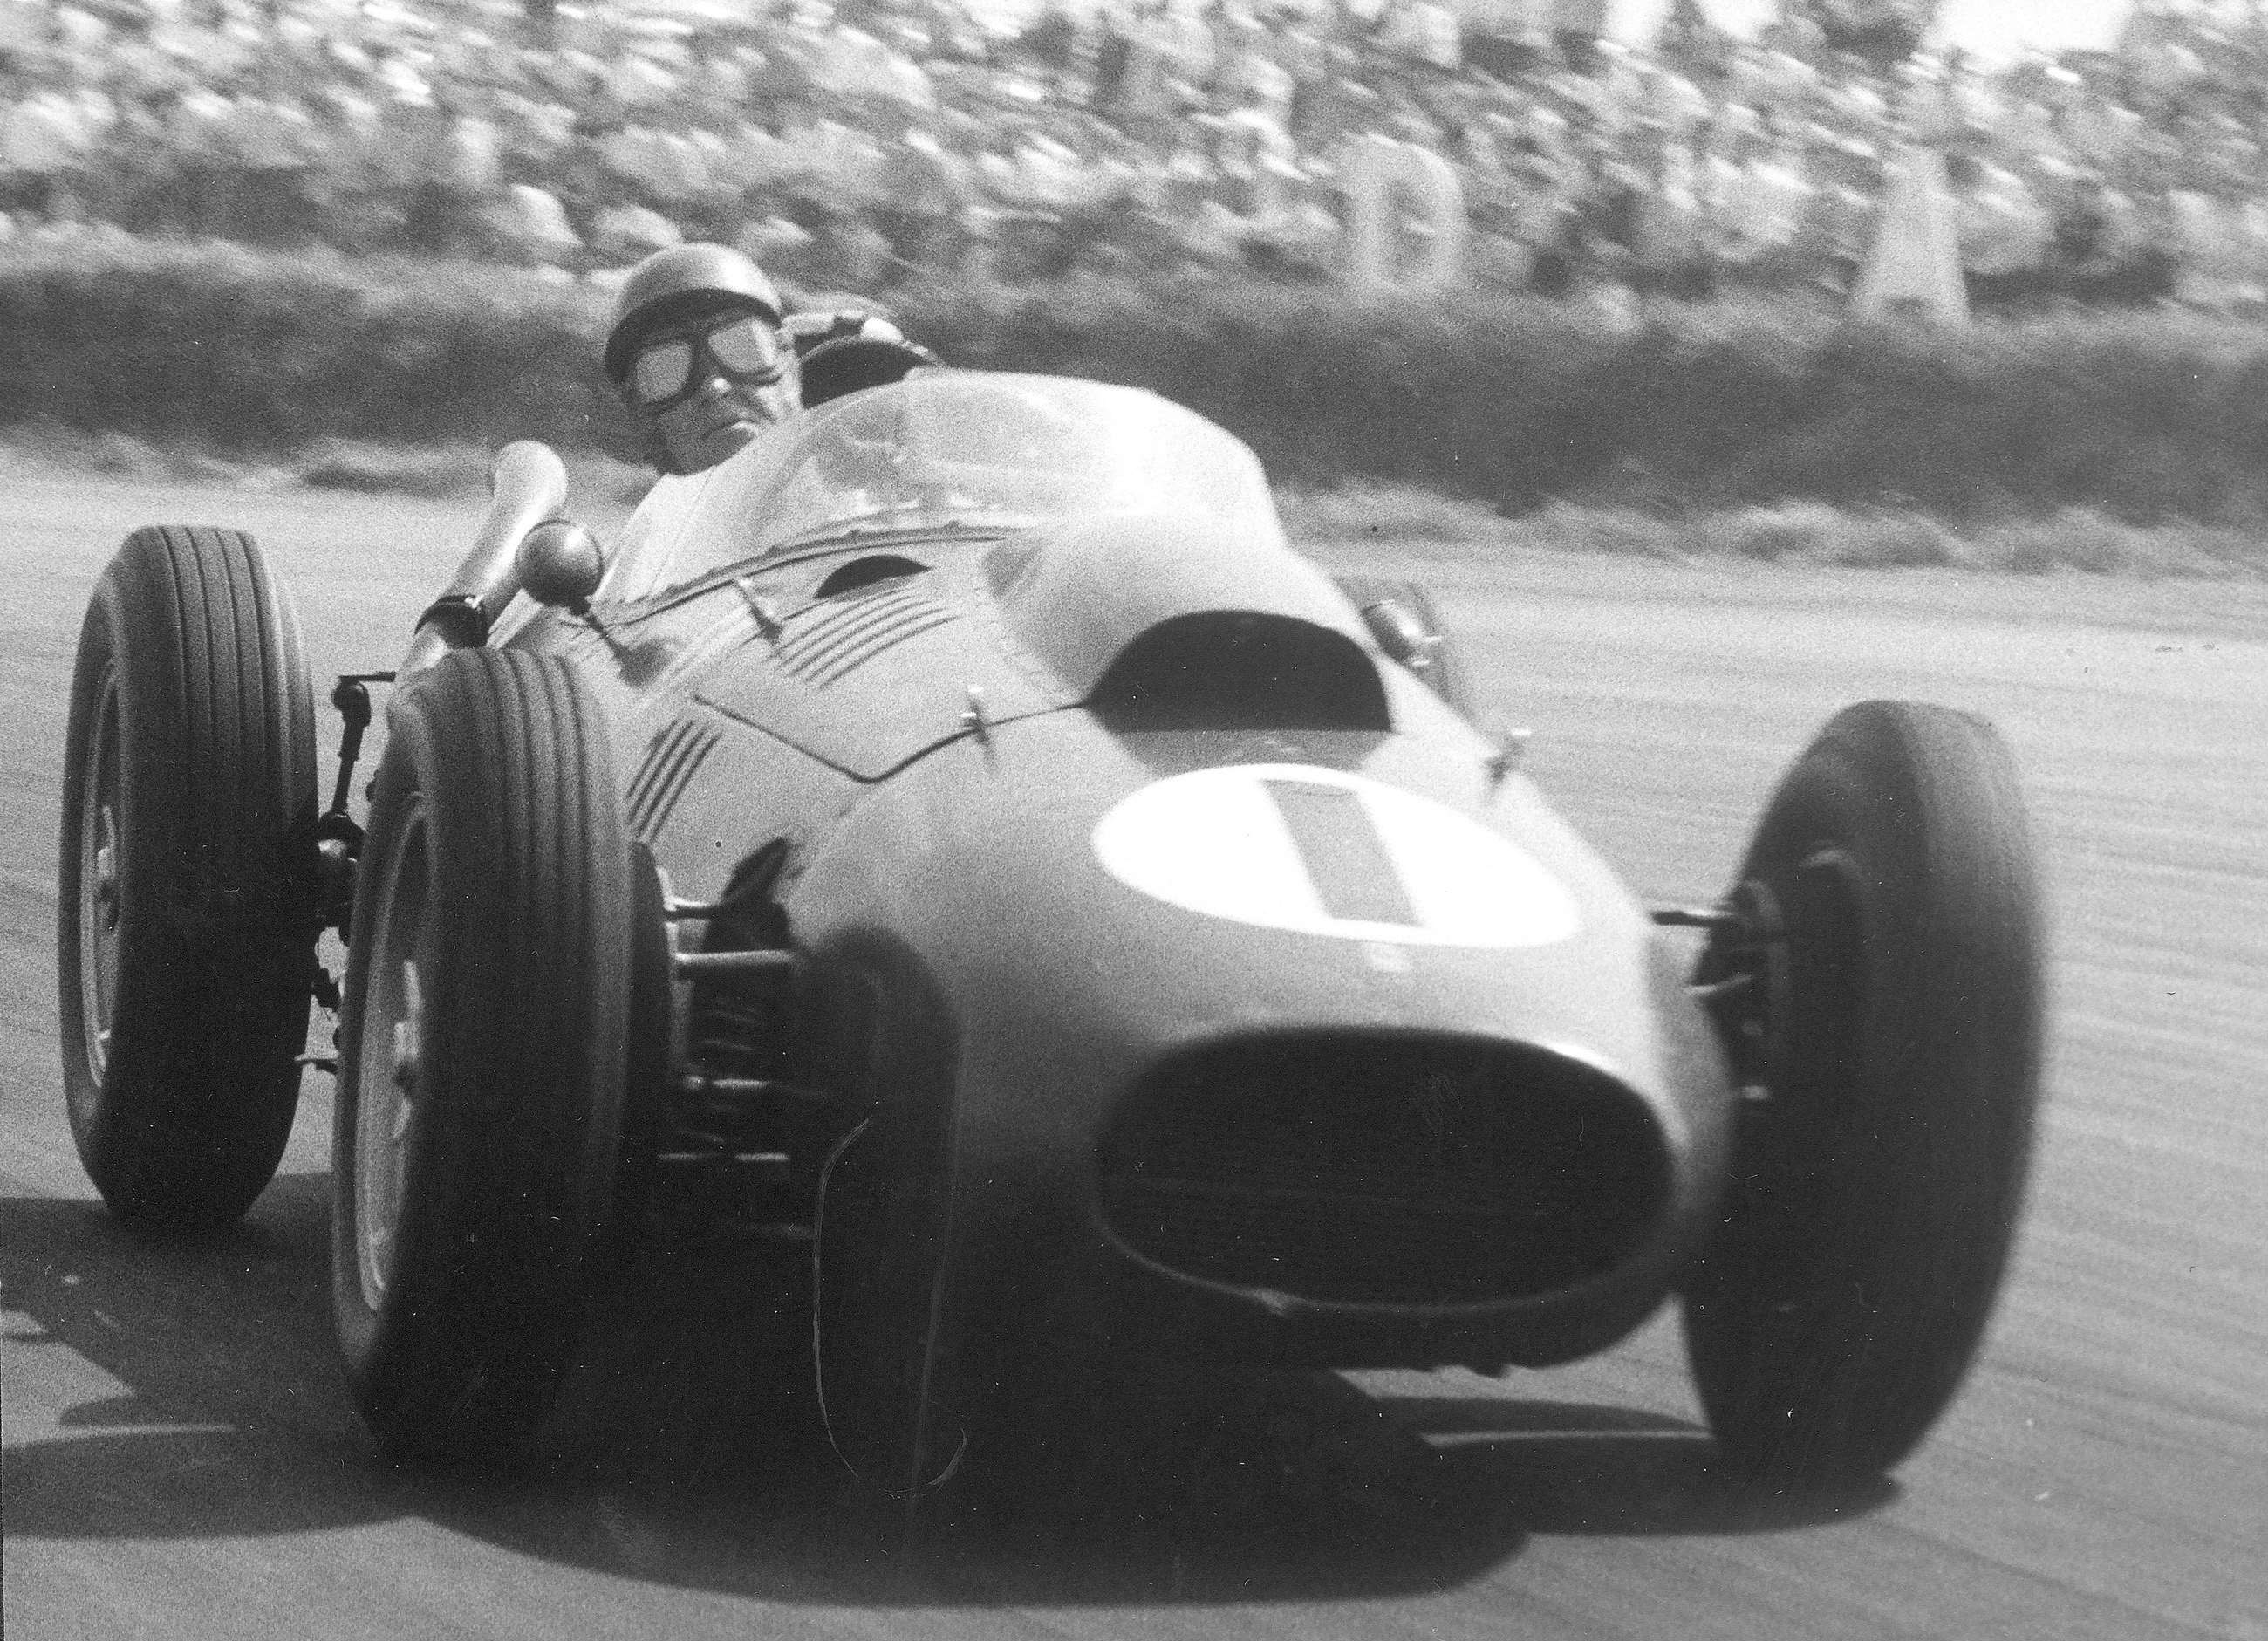 Peter Collins - winner of the 1958 British GP at Silverstone - in full flight on his works Ferrari Dino 246.